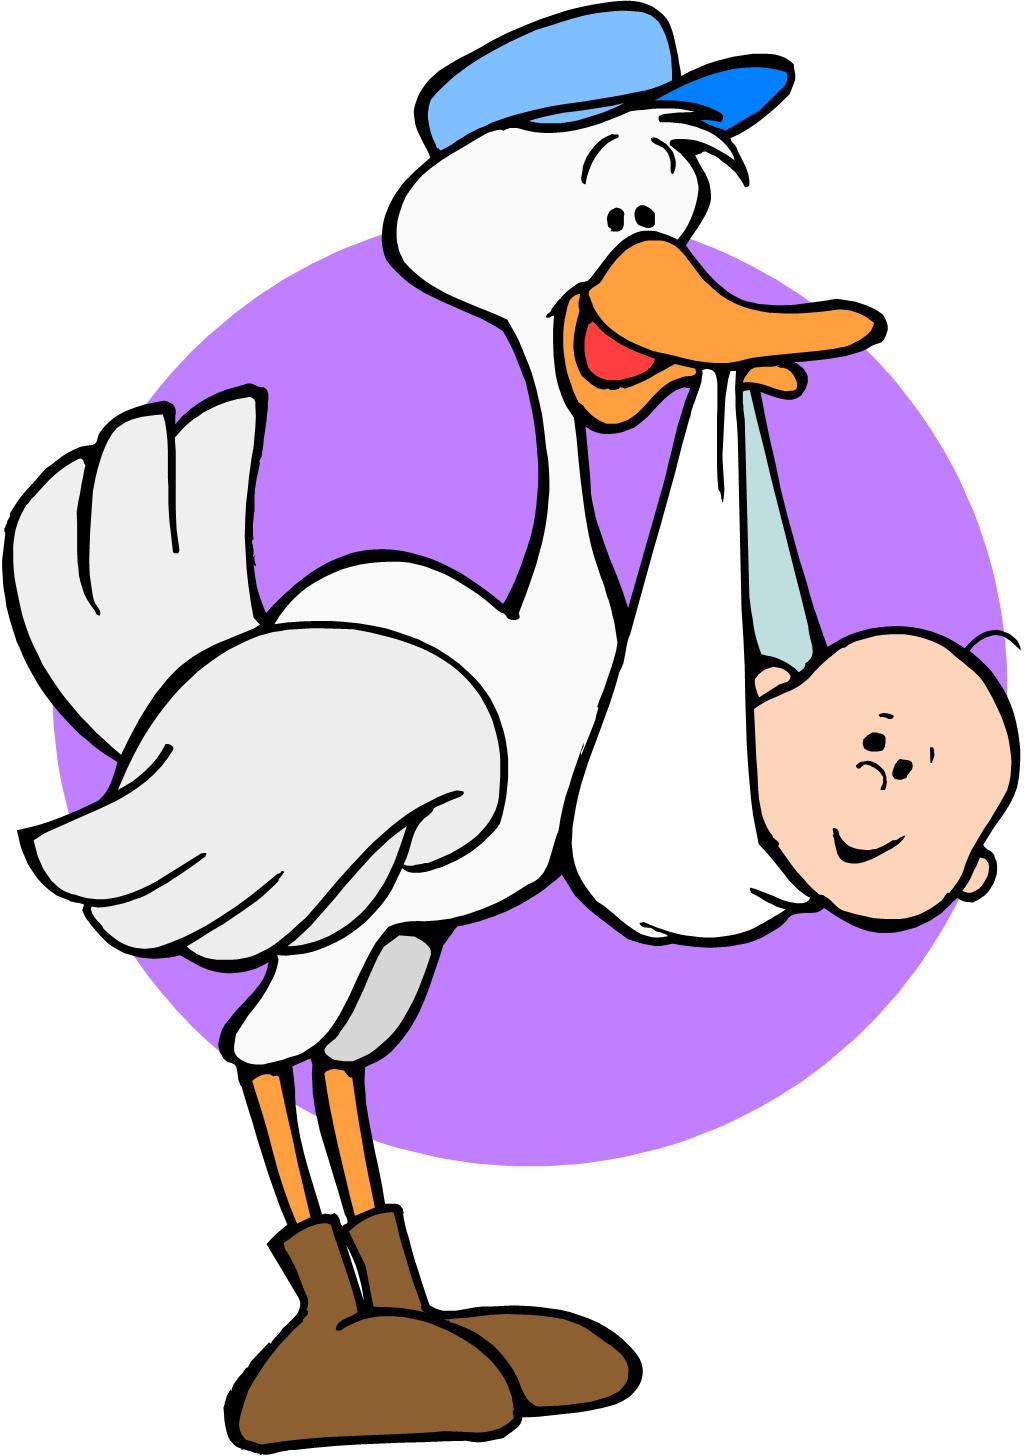 Stork With Baby - Clipart library